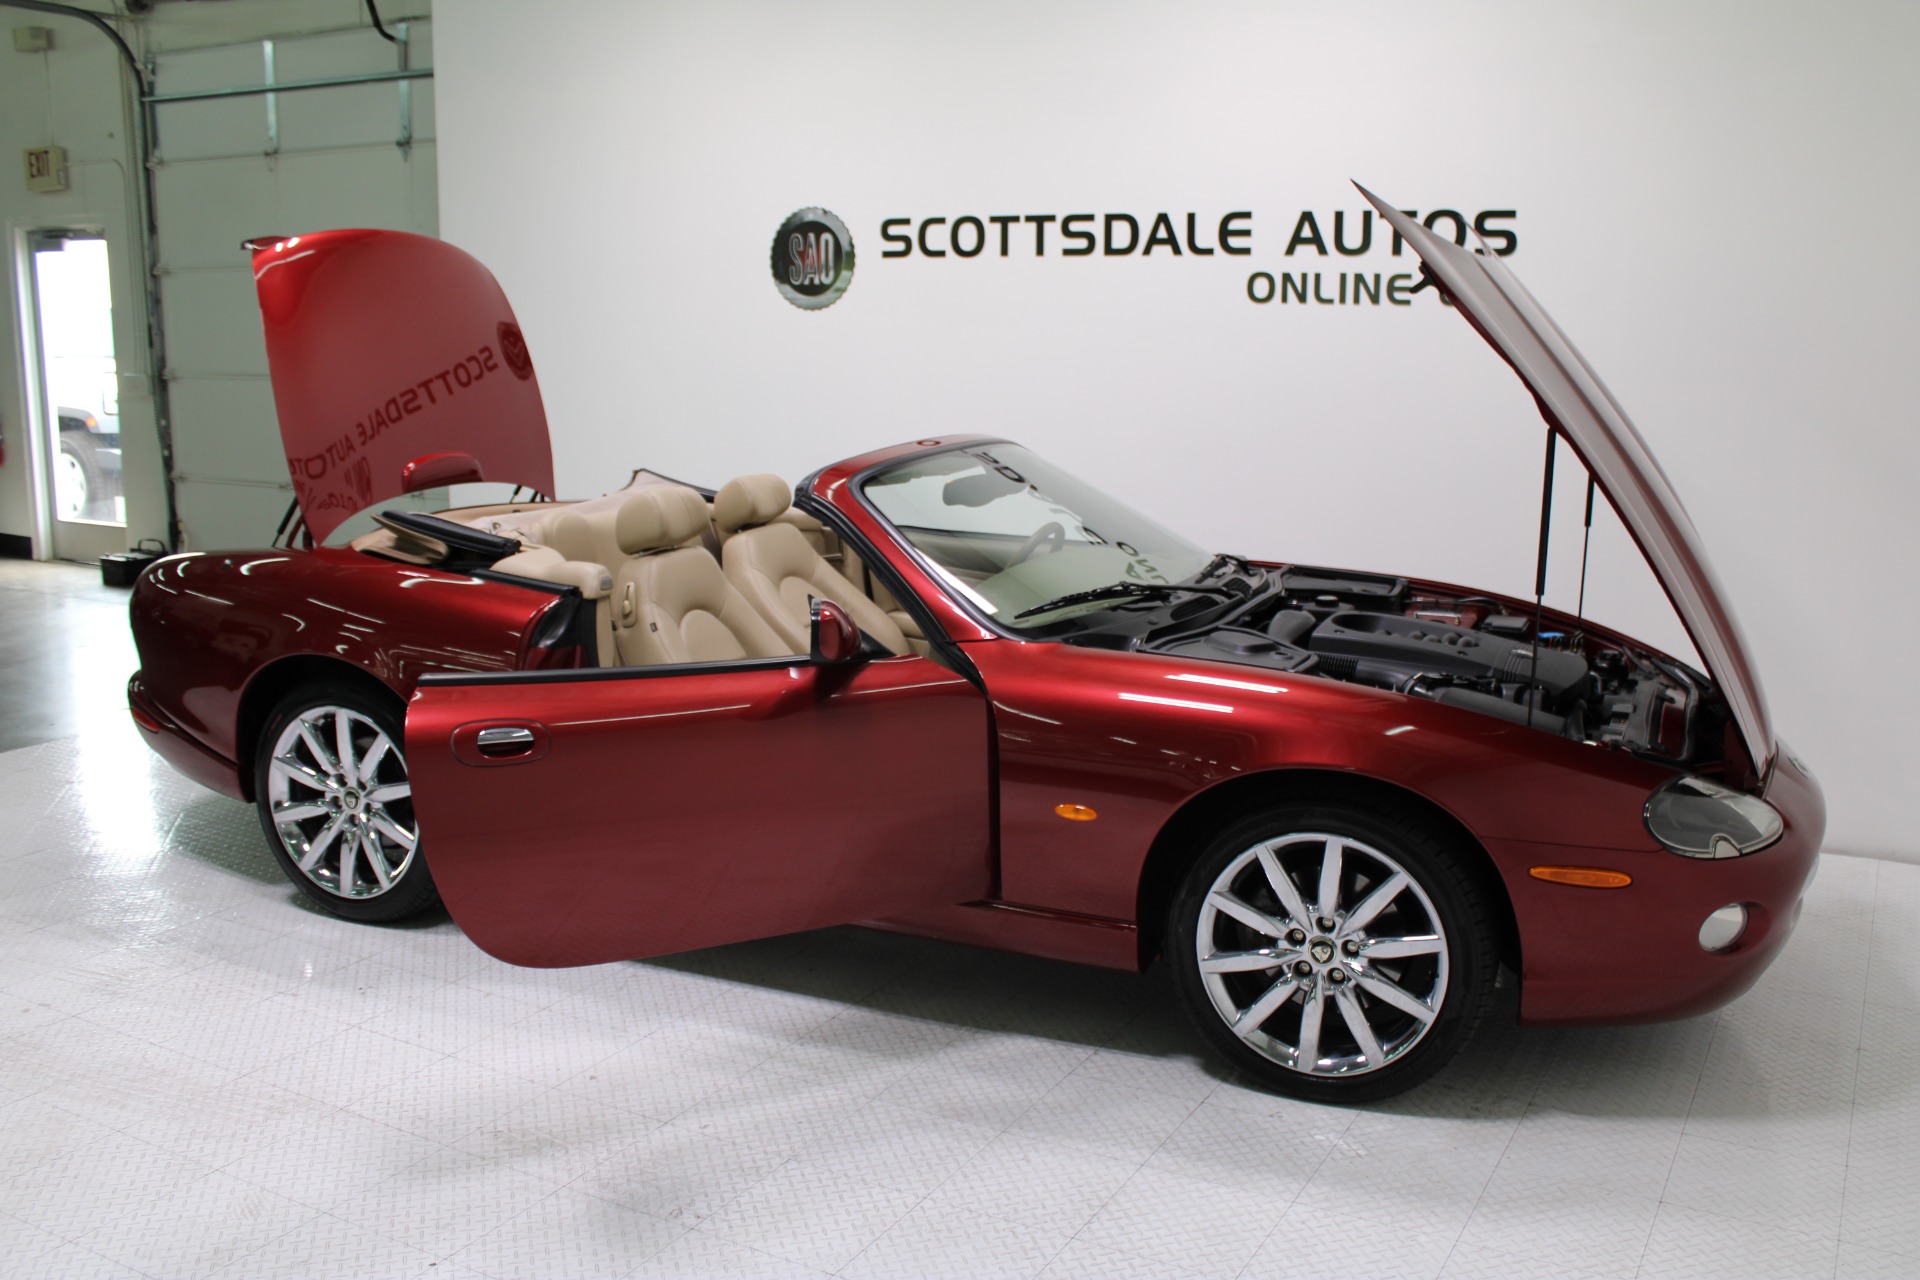 Used-2006-Jaguar-XK8-Victory-Edition-Convertible-Land-Rover